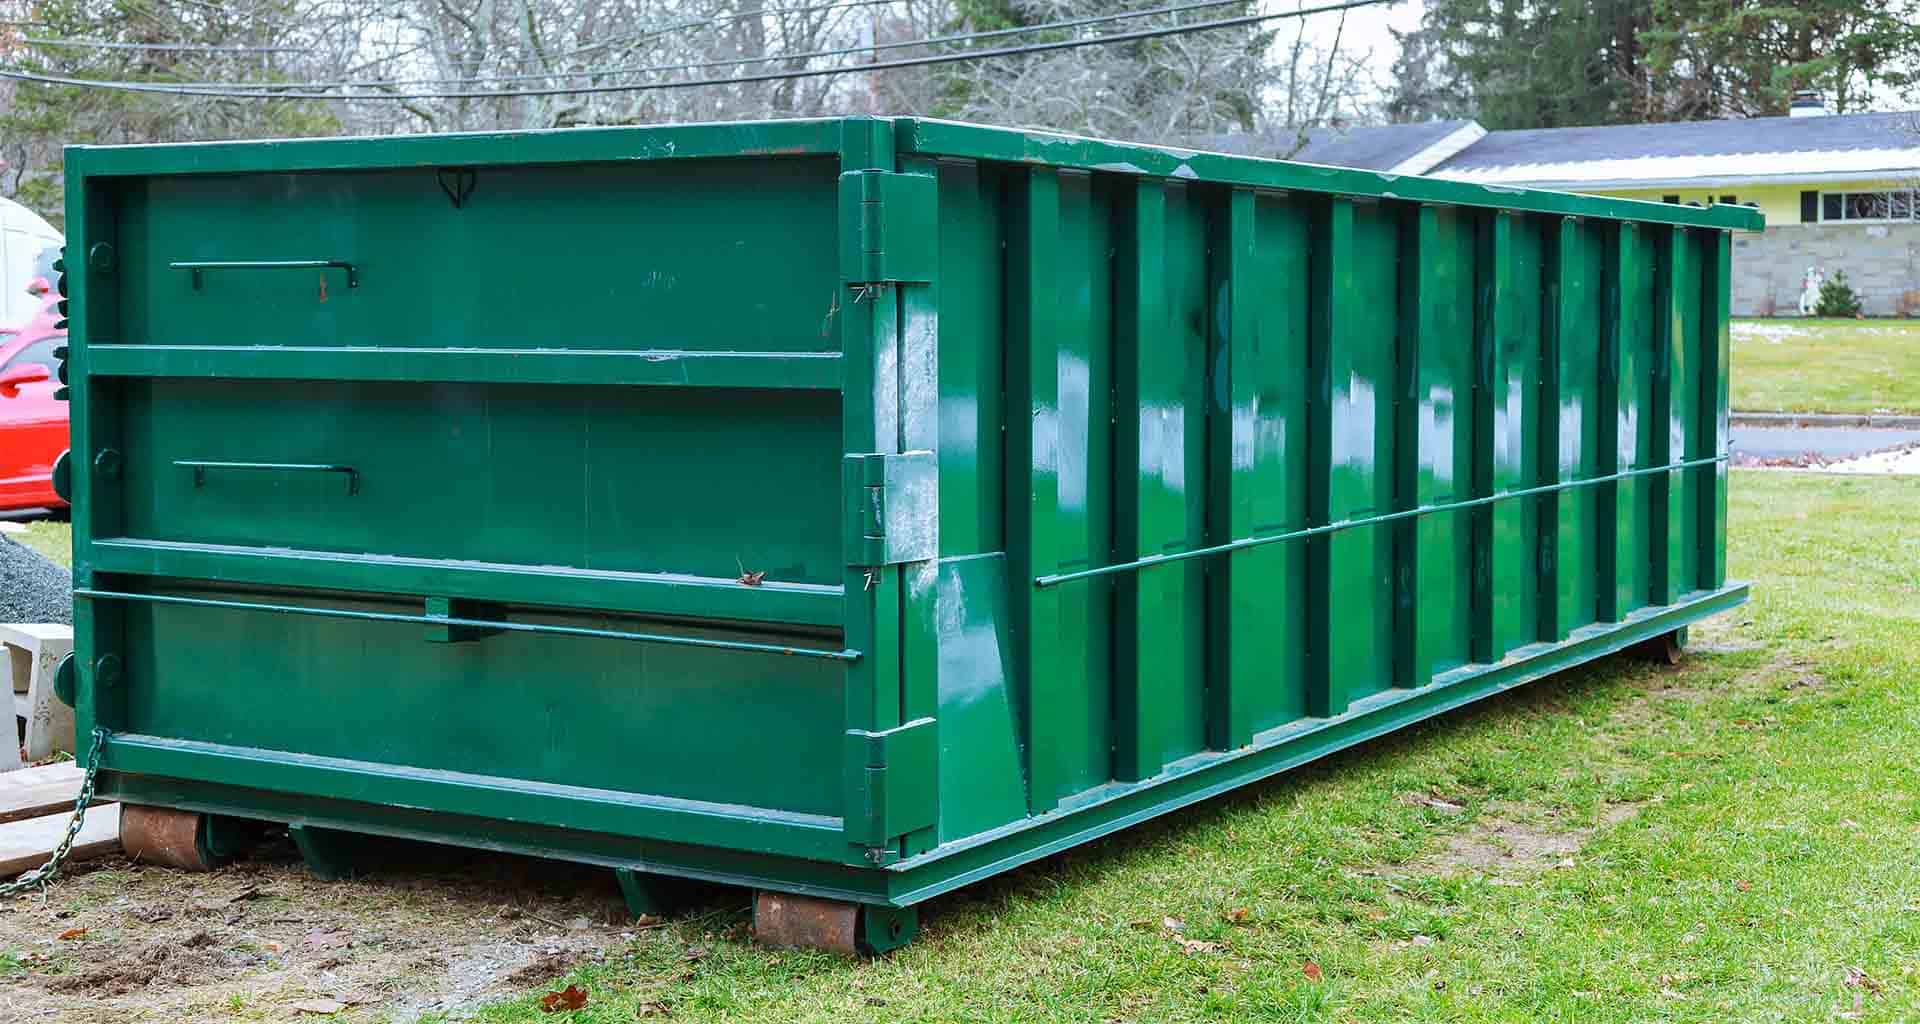 Dumpster Rentals in Allegheny County PA